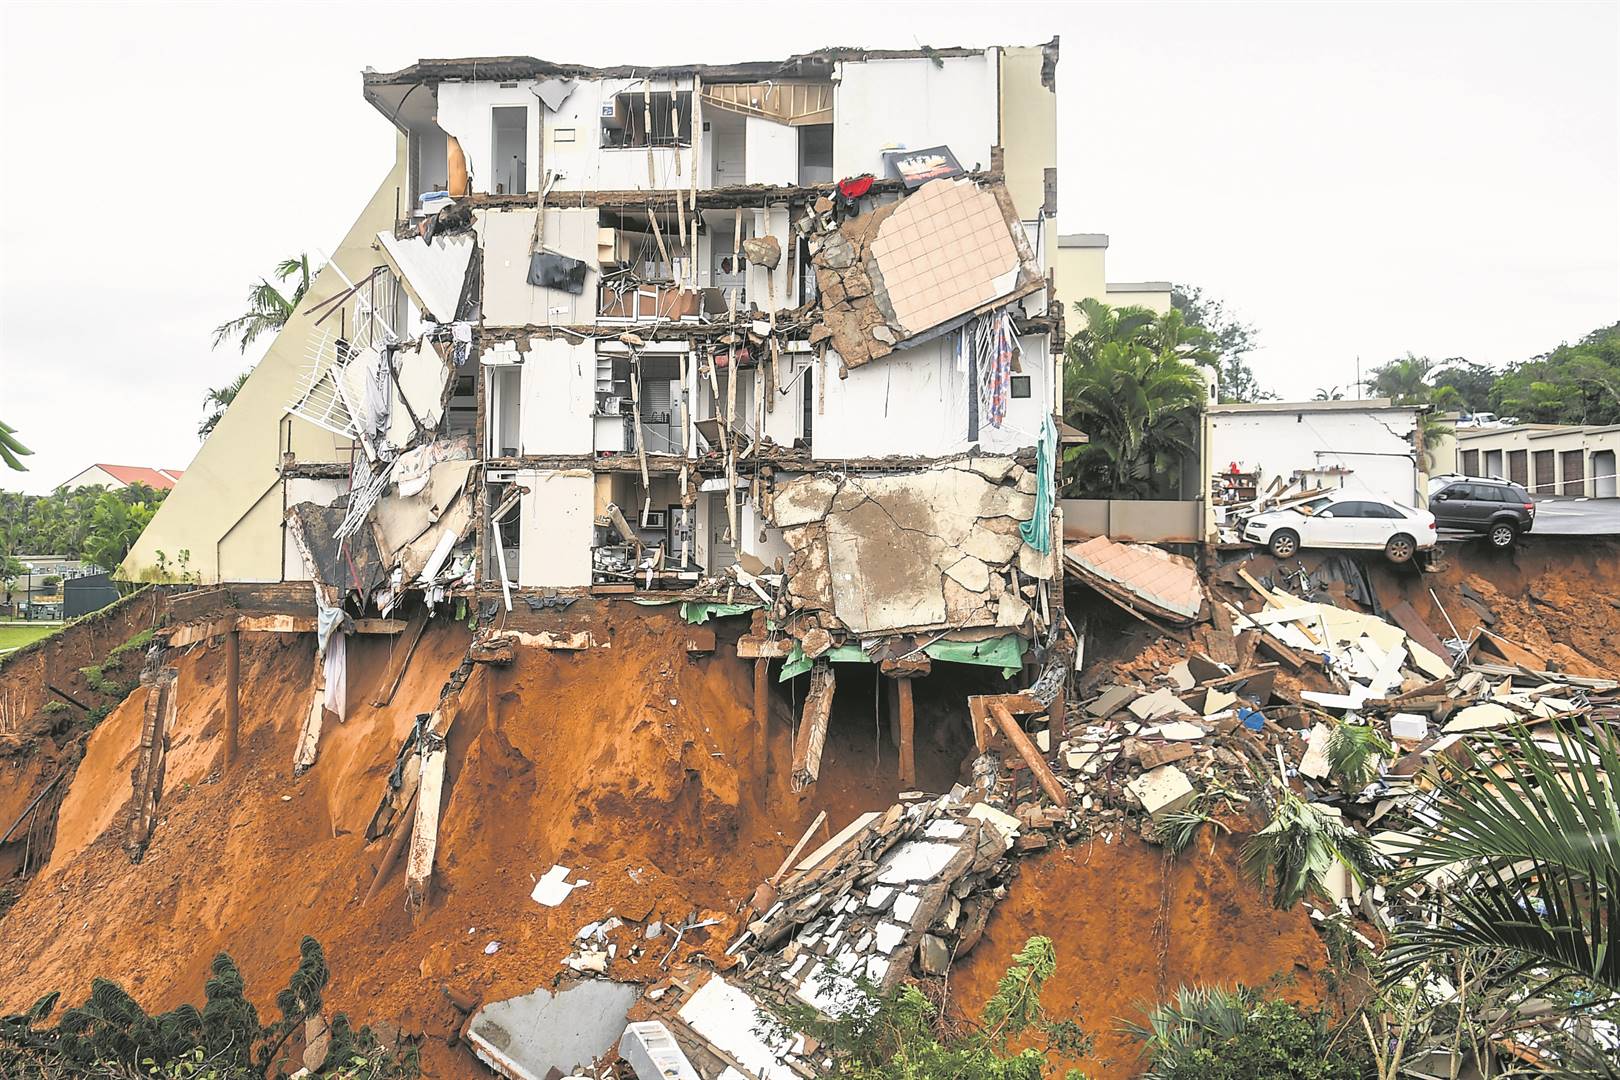 The heavy rains over the weekend destroyed some flats in Surfside residential units in Bellamont Road, Umdloti. The units collapsed on Saturday evening. No casualties were reported. The building was severely damaged in the devastating floods that hit KwaZulu-Natal last month.